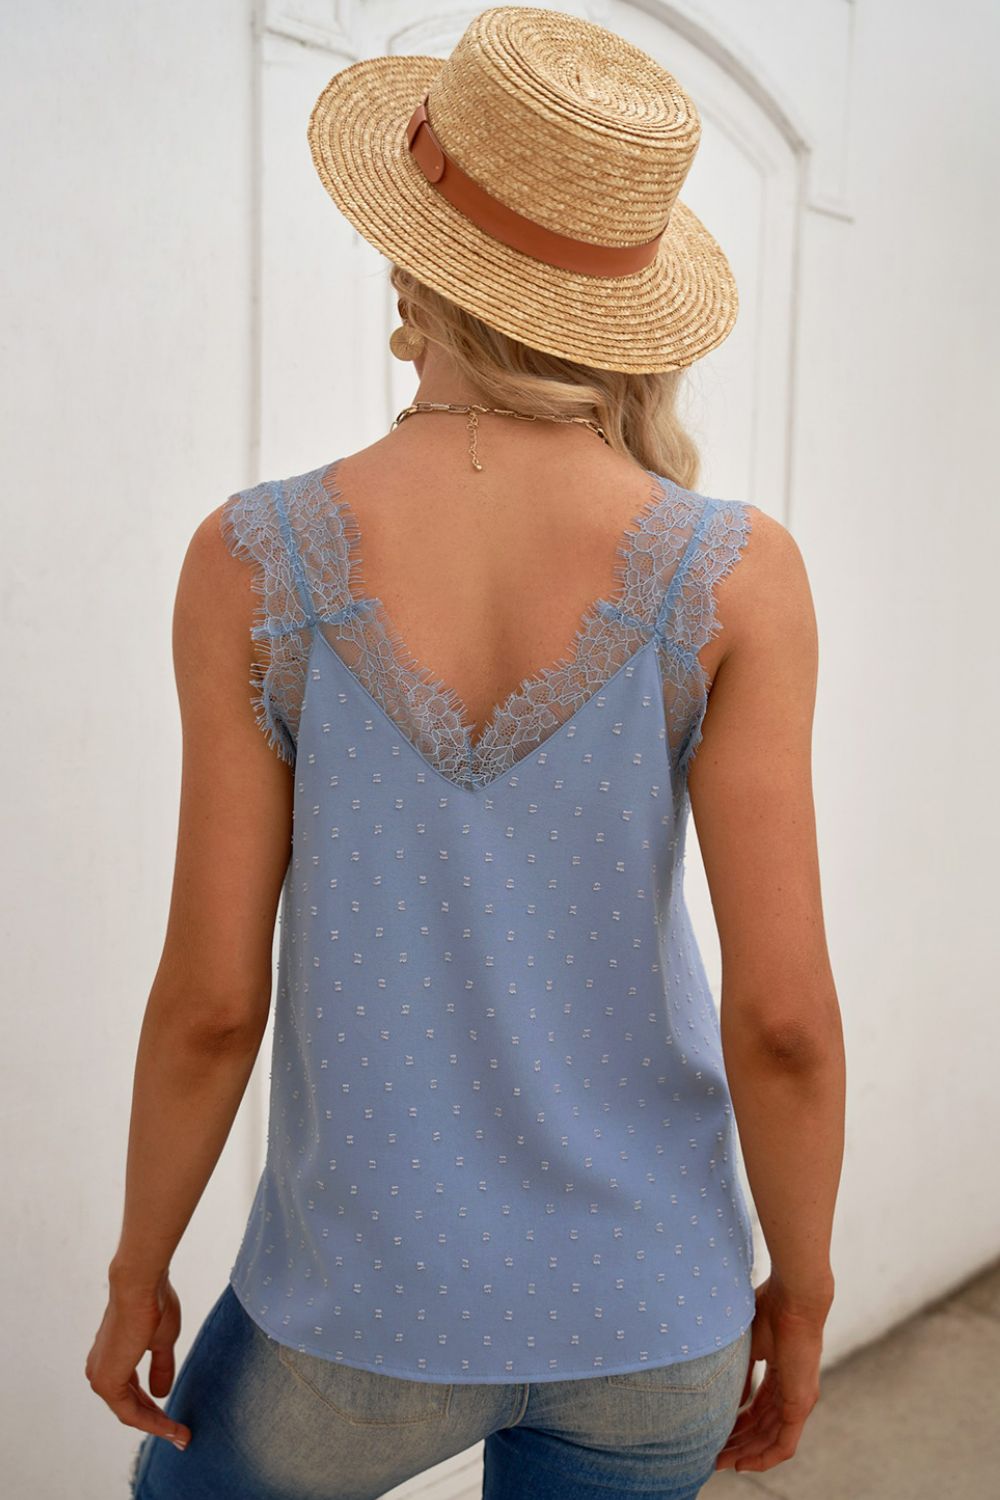 Swiss Dot Spliced Lace Sleeveless Top - Bakers Shoes store